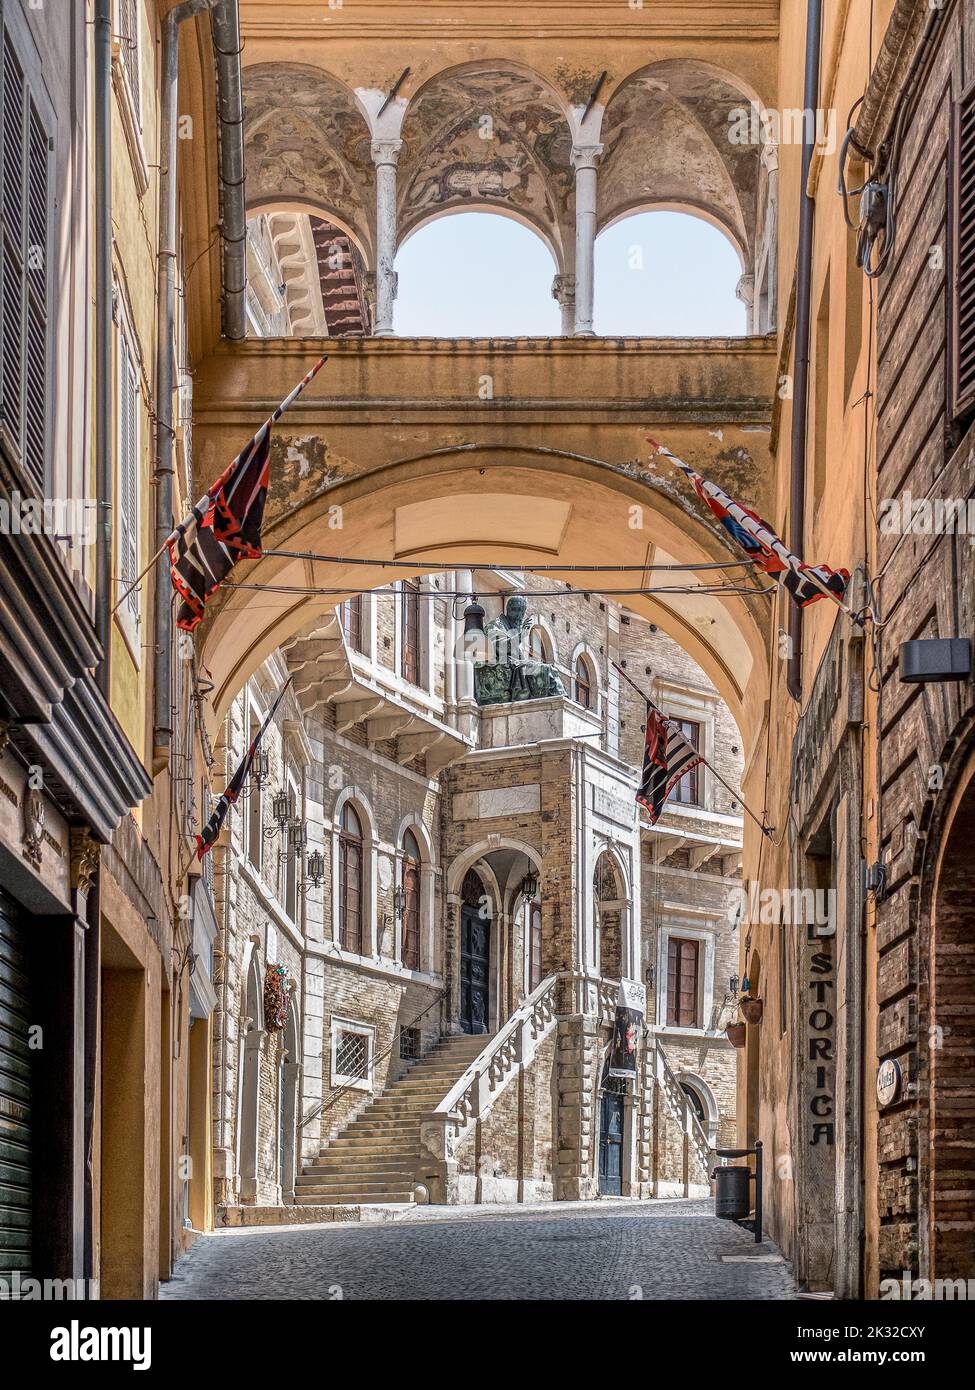 Fermo, Marche, Italy. Medieval Priory Palace seen from the vault that leads to Piazza del Popolo in Fermo. Stock Photo